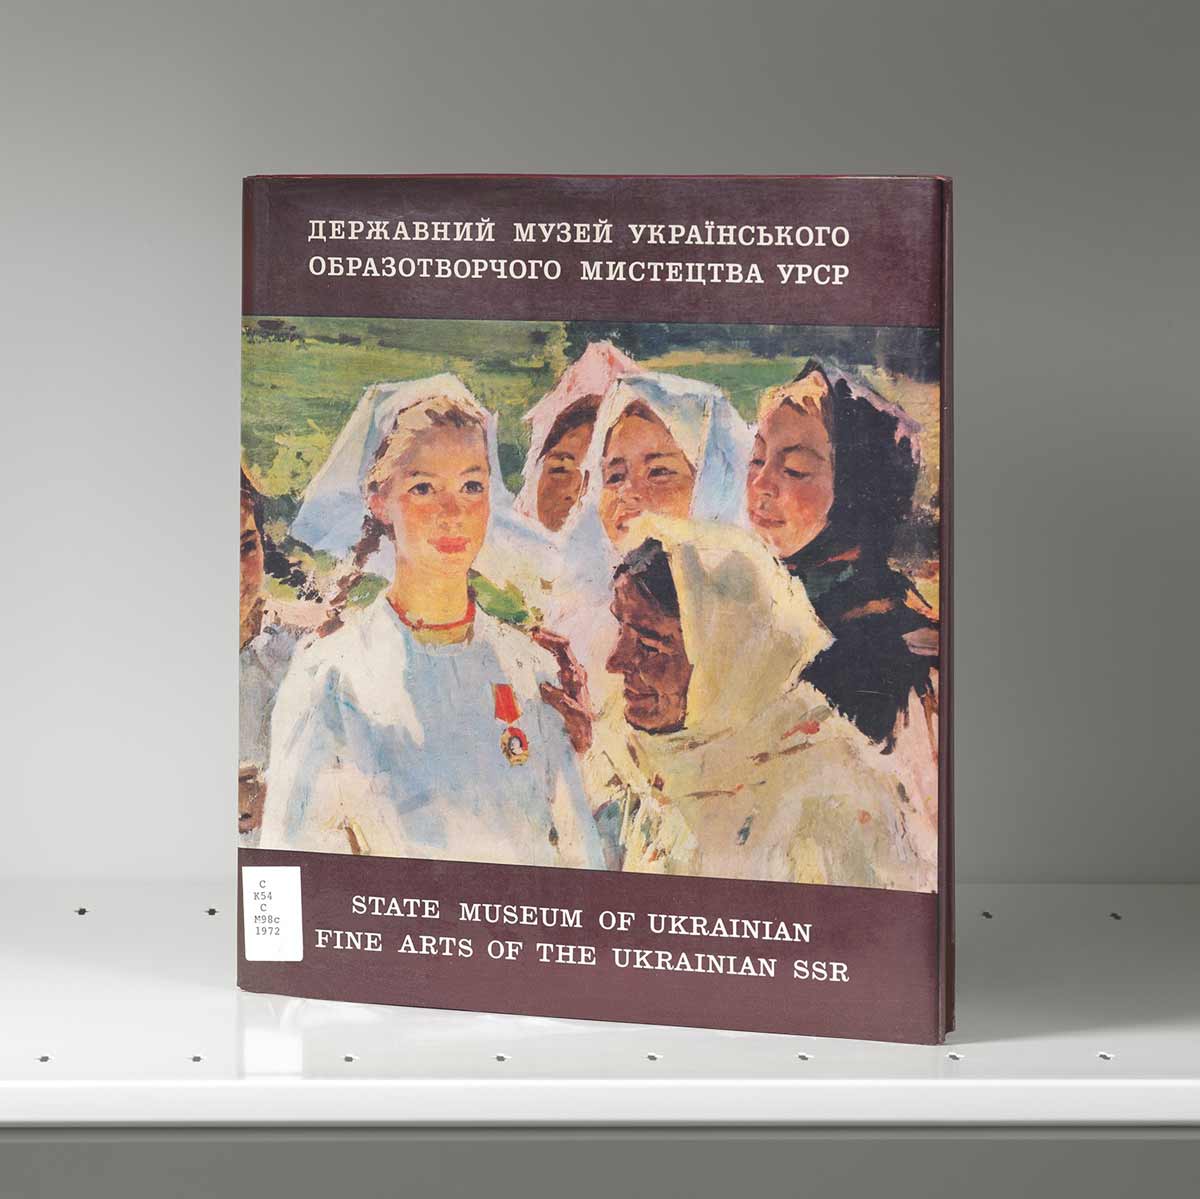 Book on a shelf whose cover features an artwork of young women in black and white headscarves